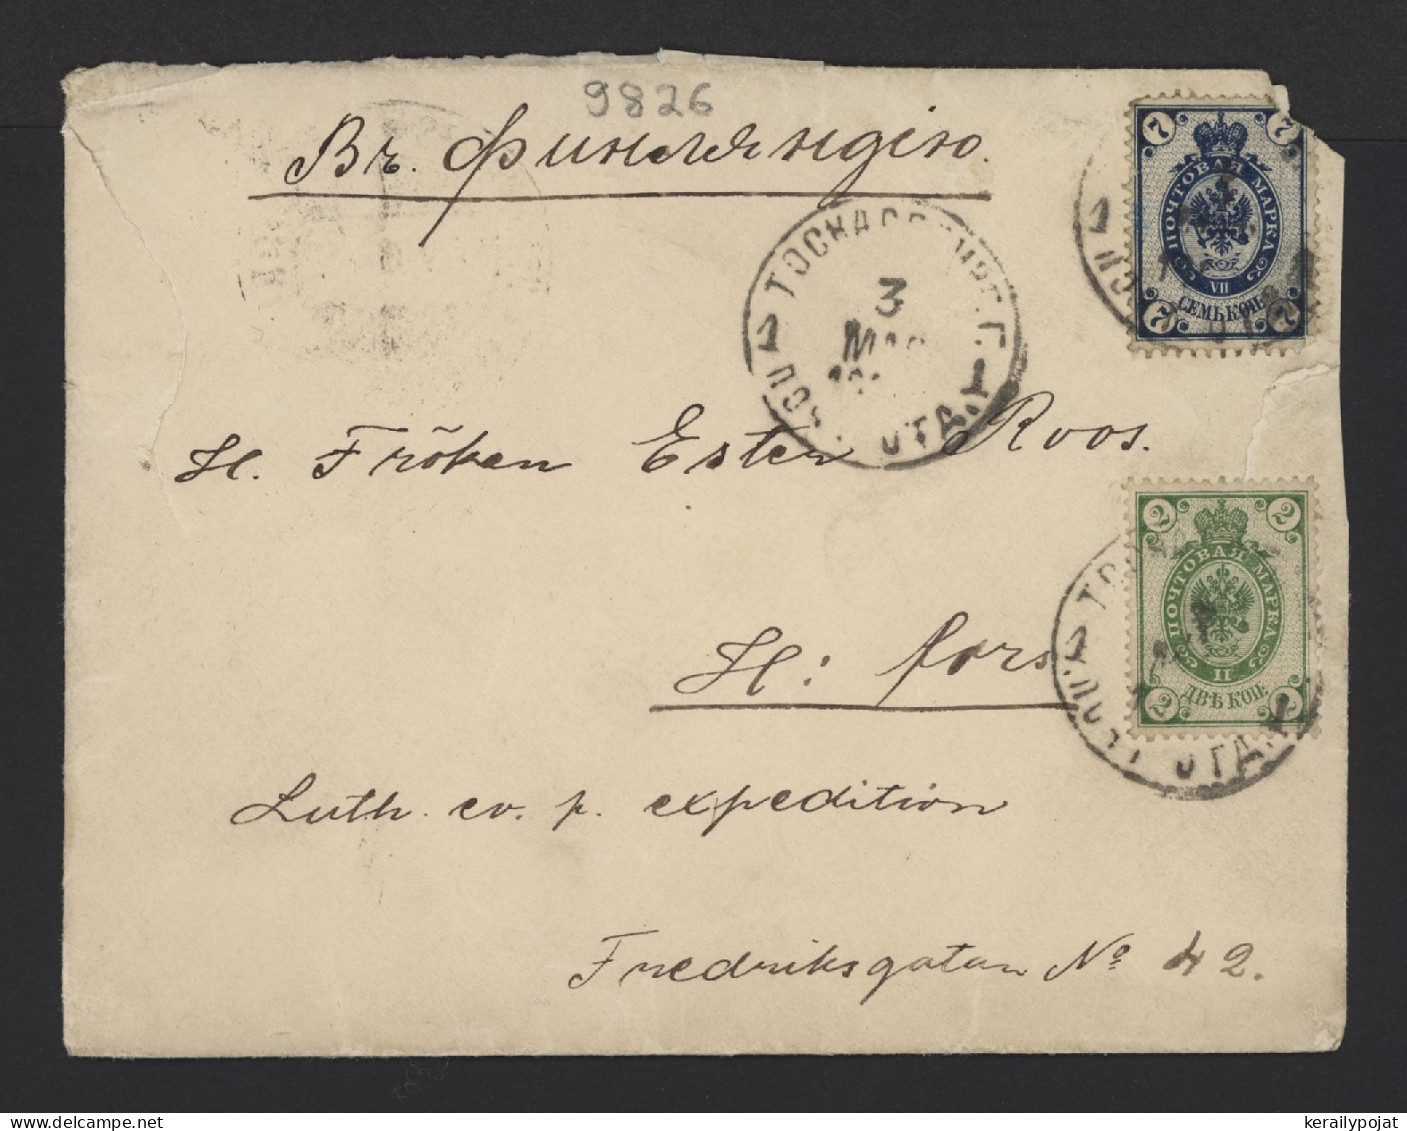 Russia 1906 Cover To Finland__(9826) - Lettres & Documents